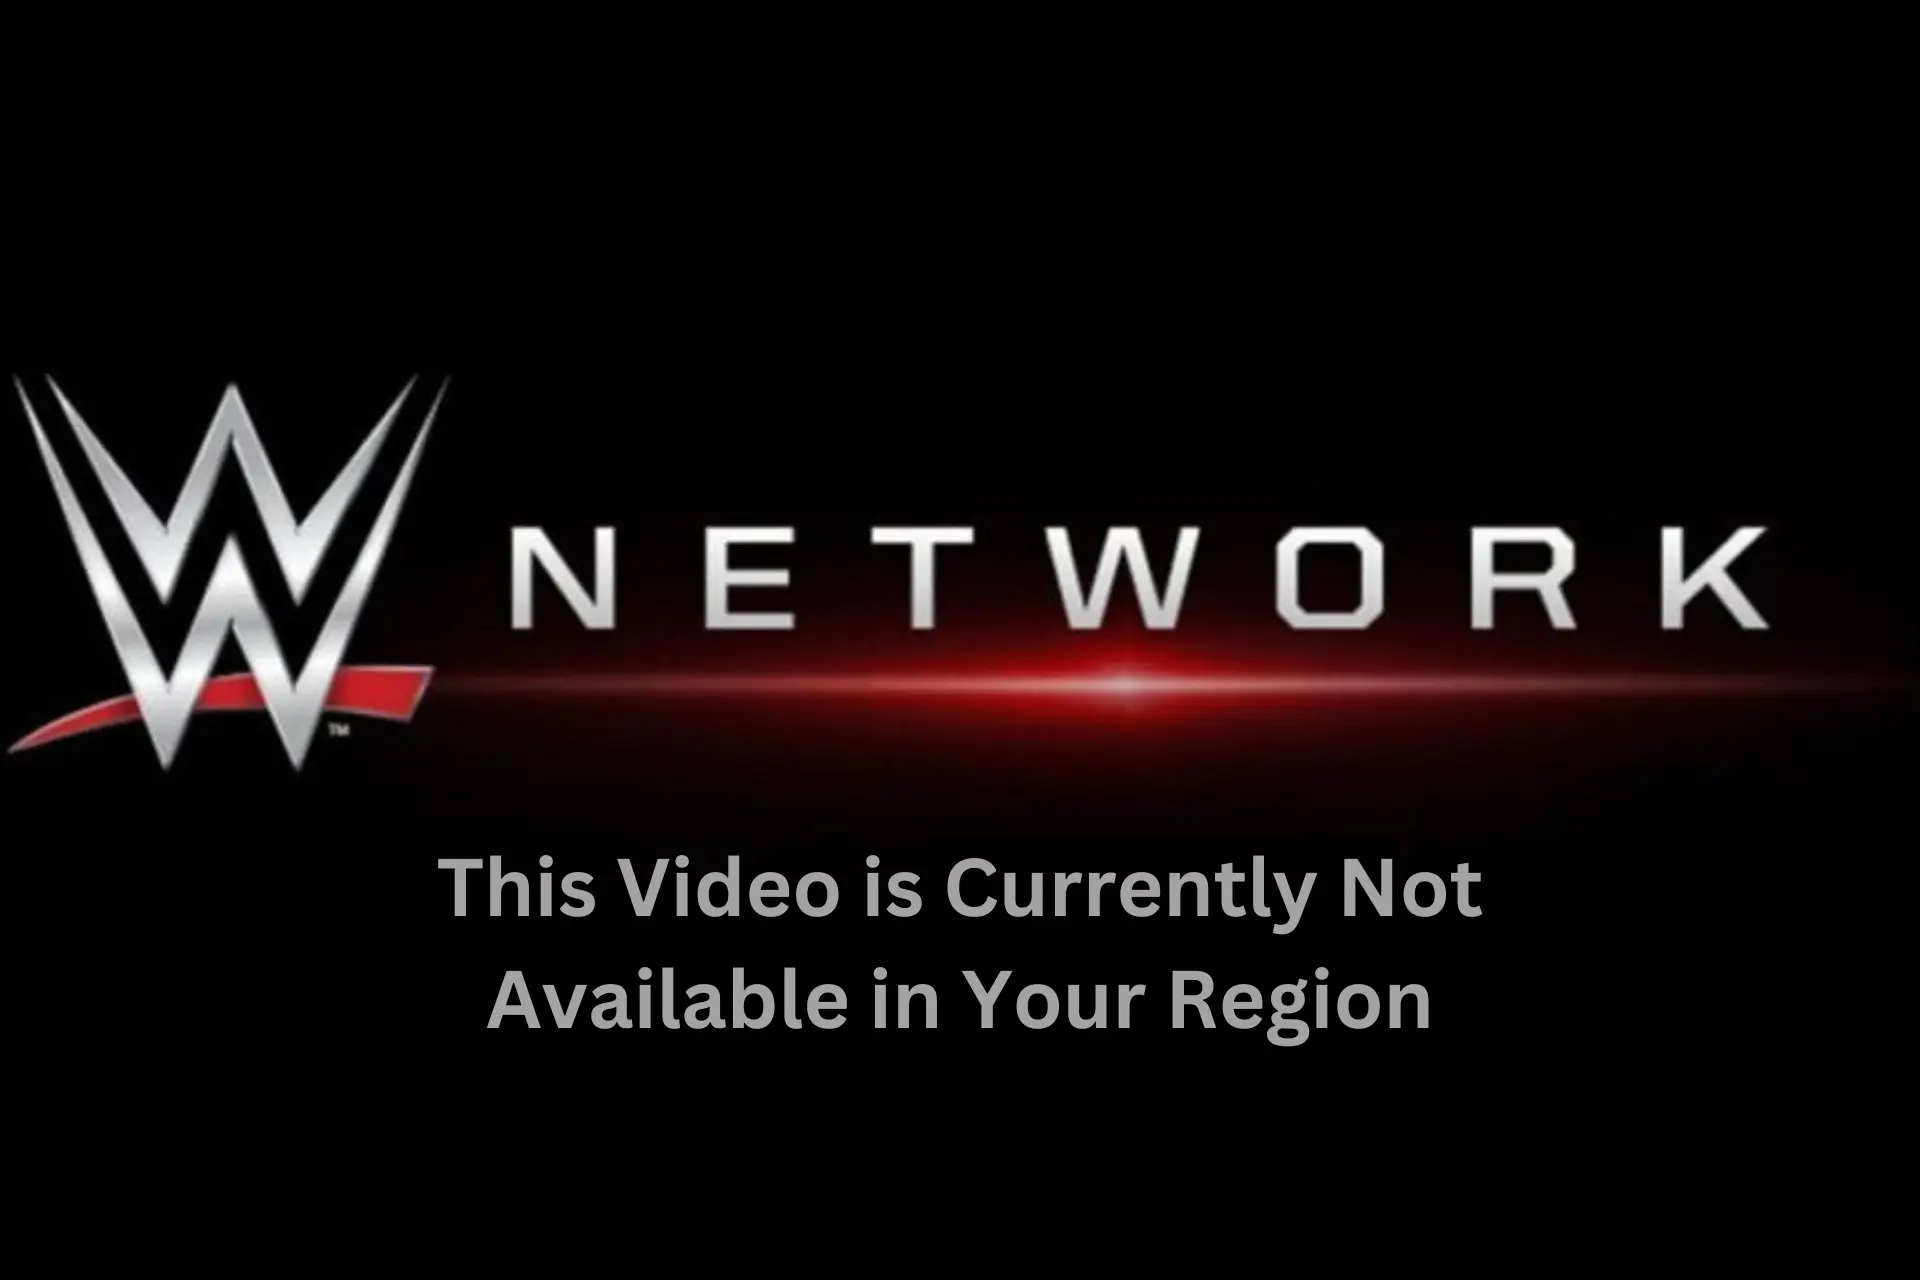 wwe This Video is Currently Not Available in Your Region